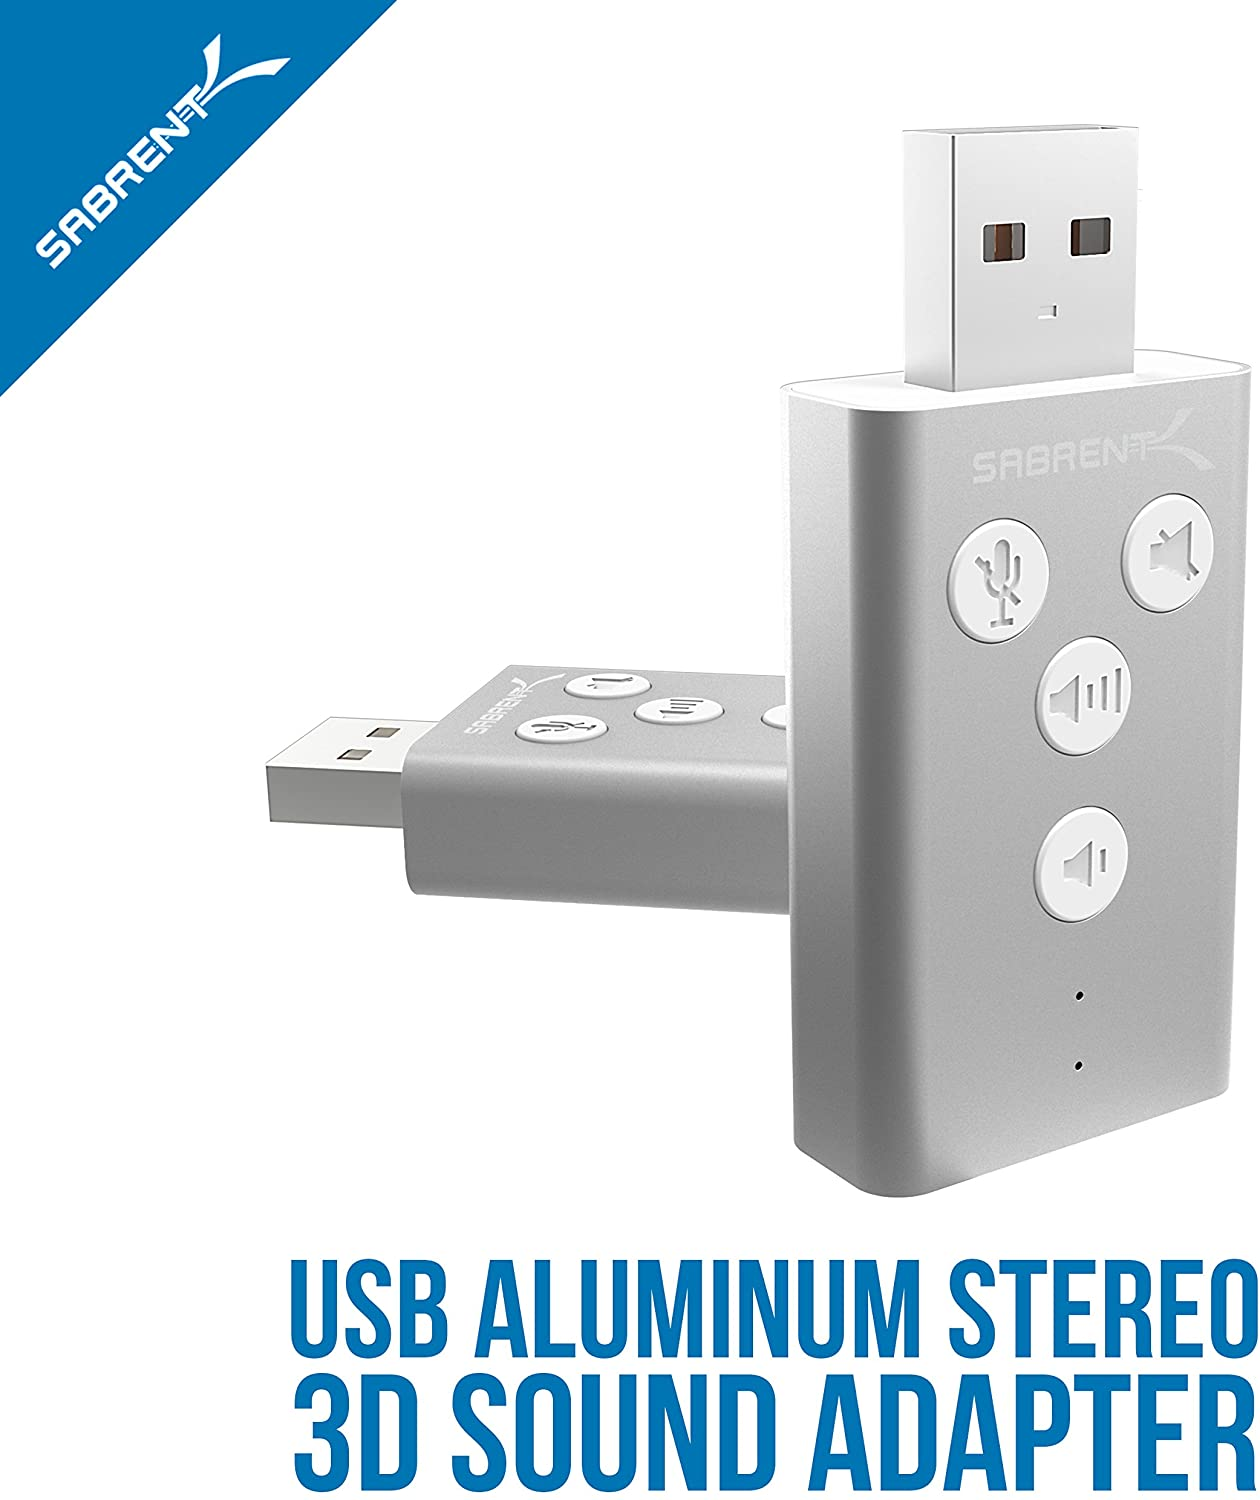 SABRENT Aluminum USB External 3D Stereo Sound Adapter for Windows and Mac. Plug and Play No Drivers Needed. [Silver] (AU-DDAS)